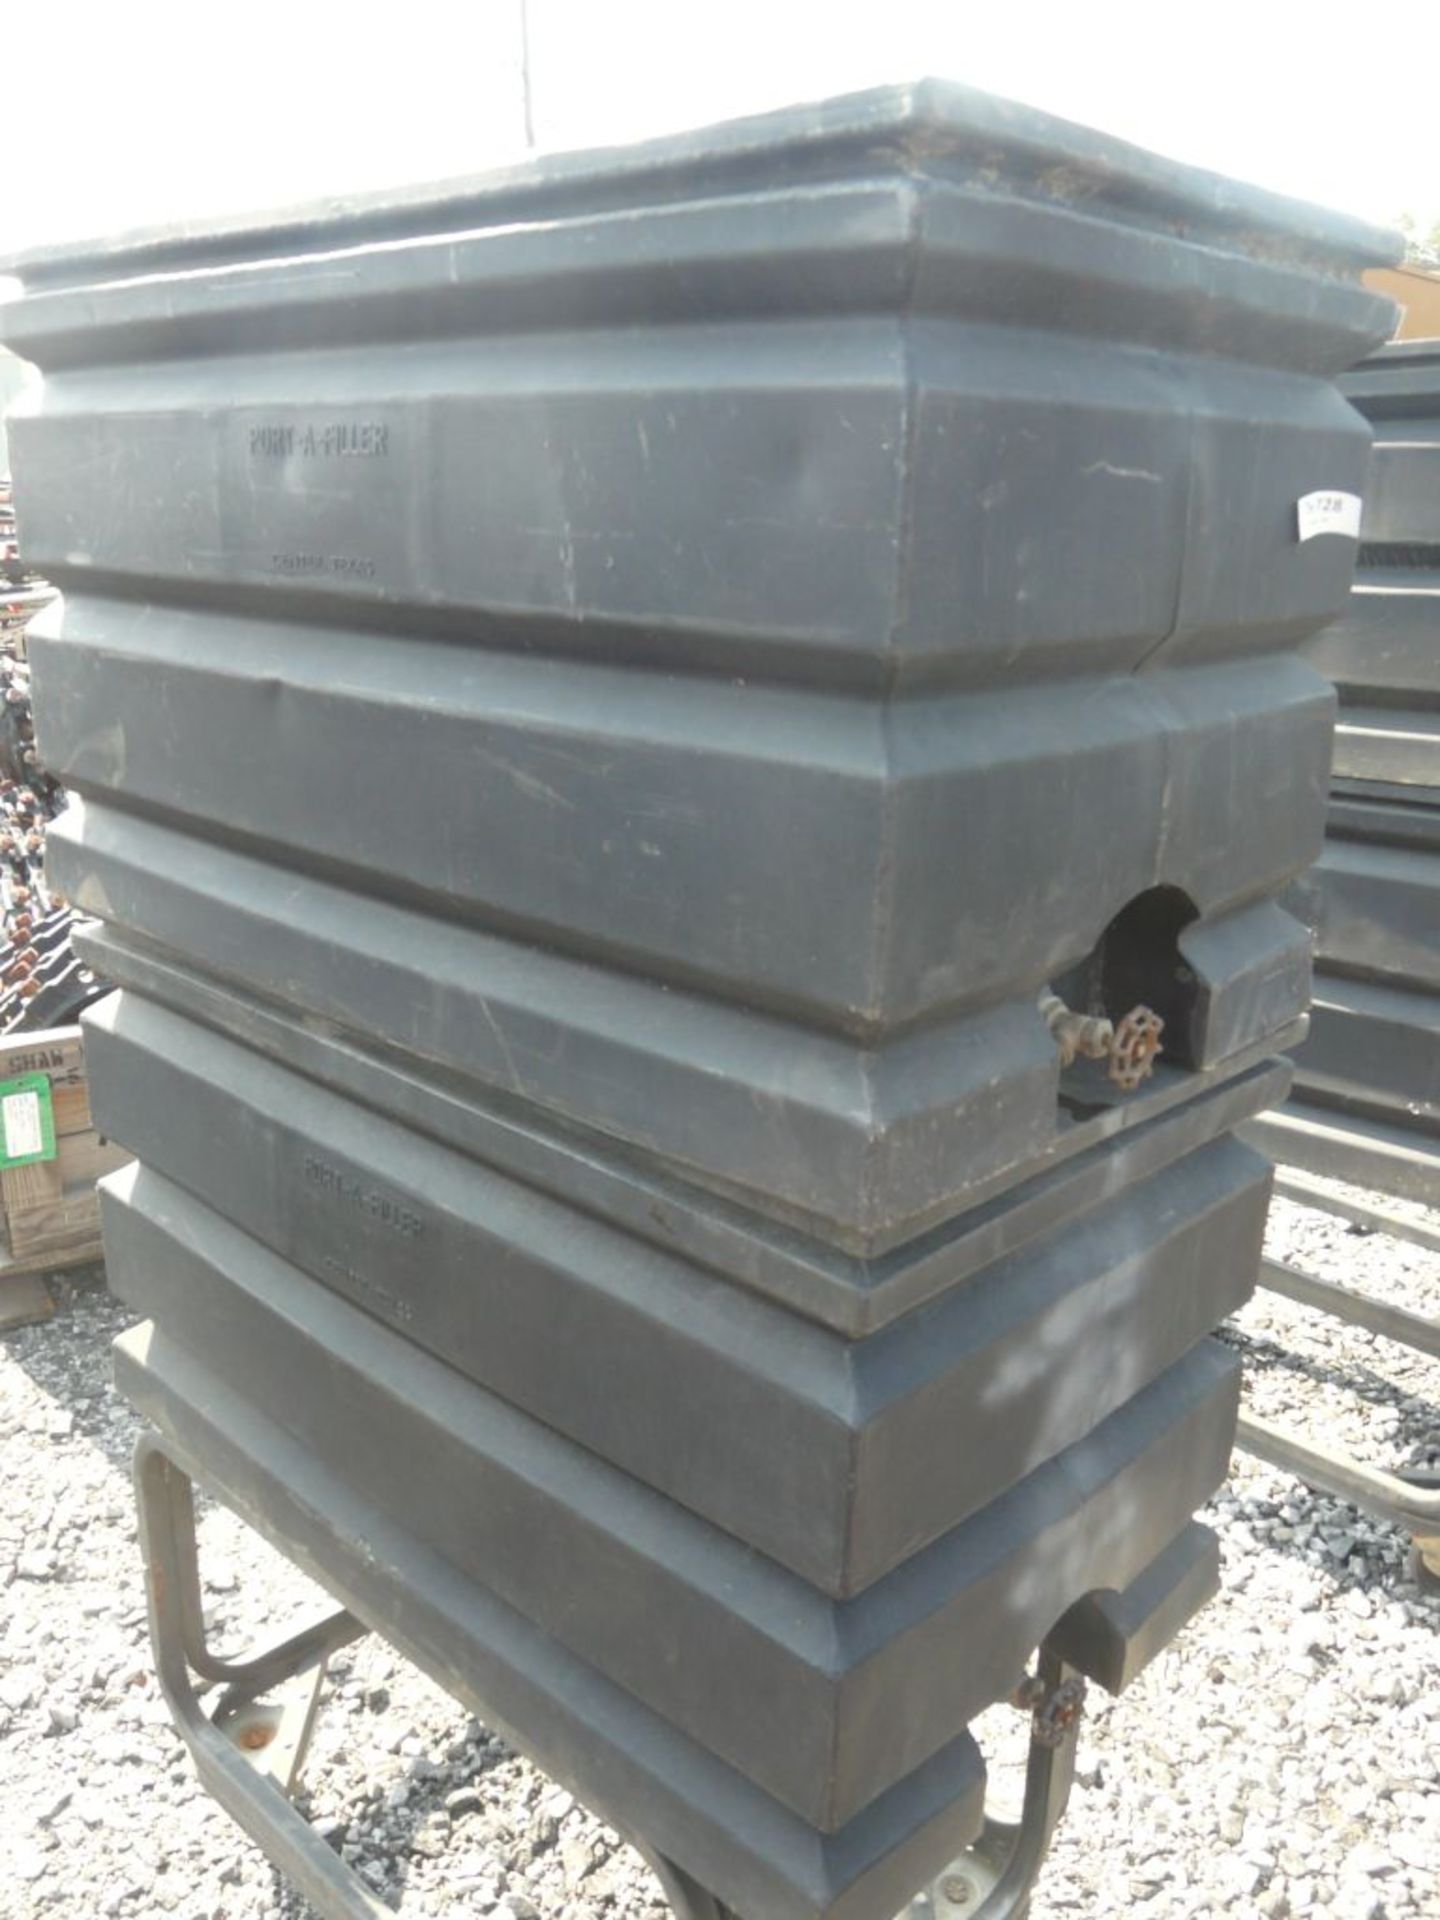 Lot of (2) Port-A-Filler Tanks w/Stand - Image 3 of 3